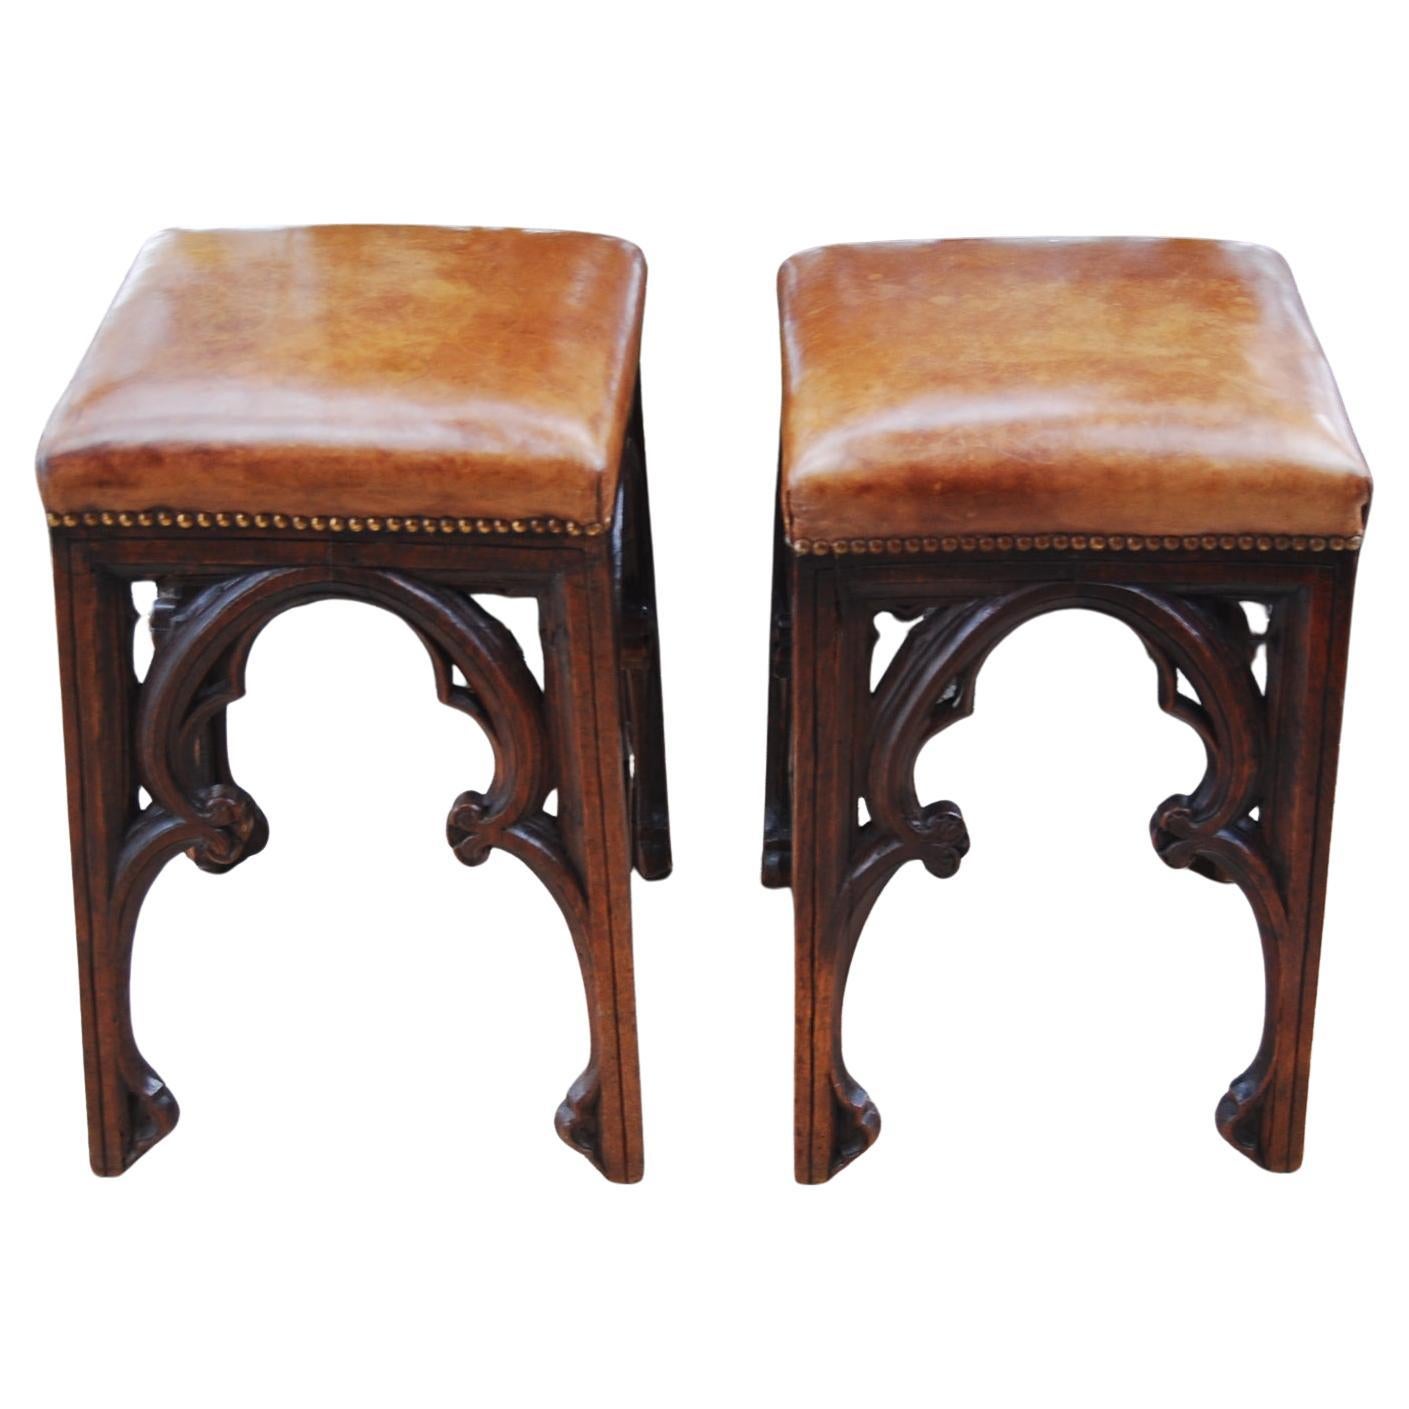 French Gothic Revival Pair of Carved Stools 19th Century